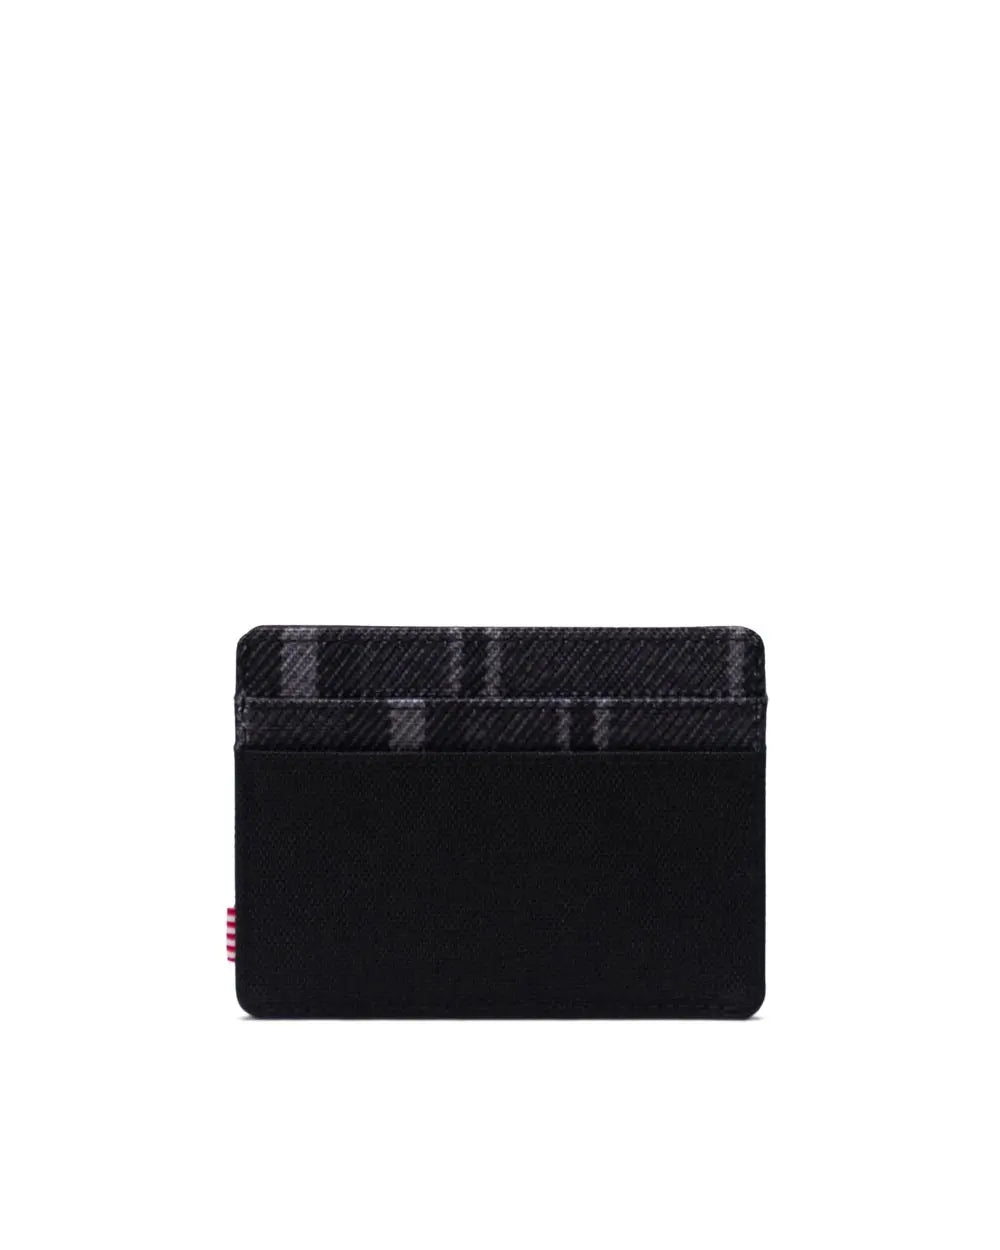 Charlie Wallet - Black/Grayscale Plaid